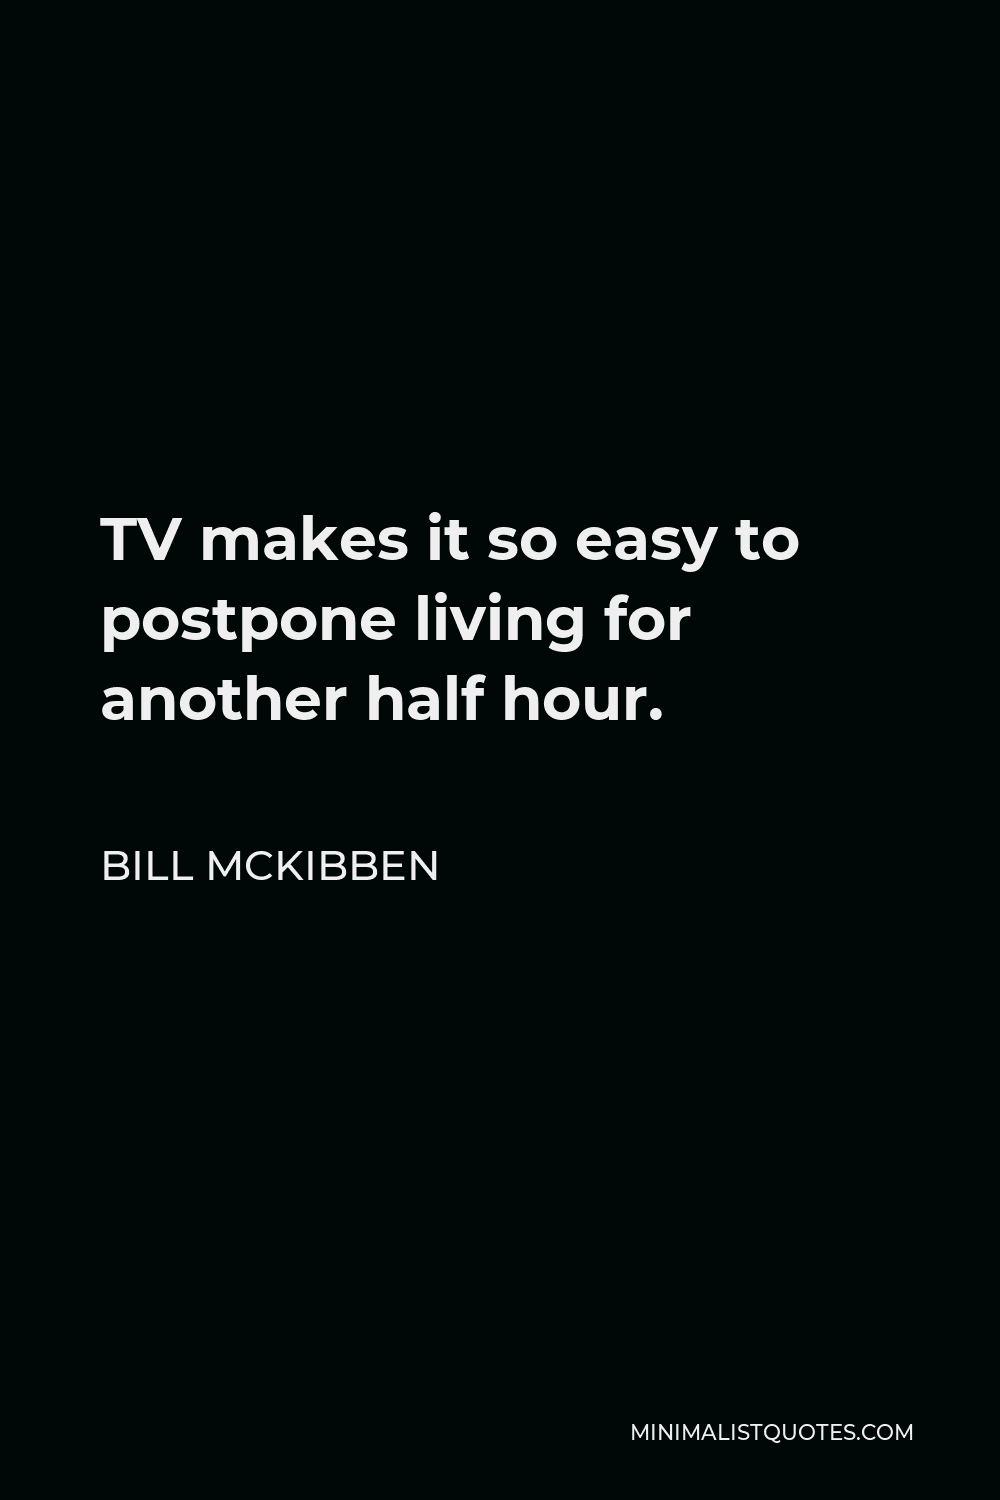 Bill McKibben Quote - TV makes it so easy to postpone living for another half hour.